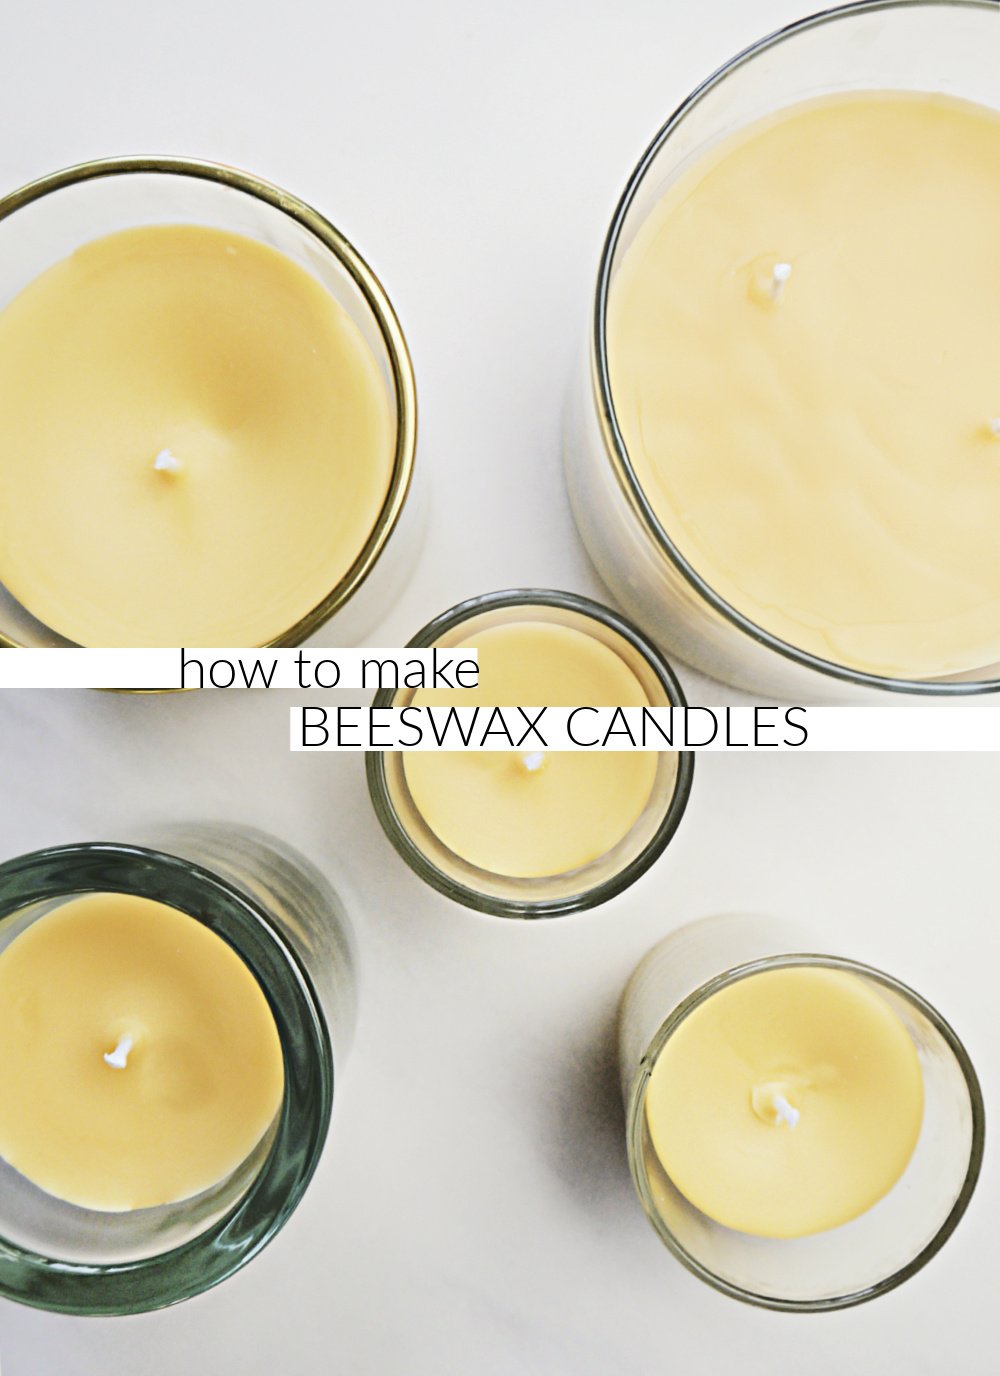 How to Make Beeswax Candles cover